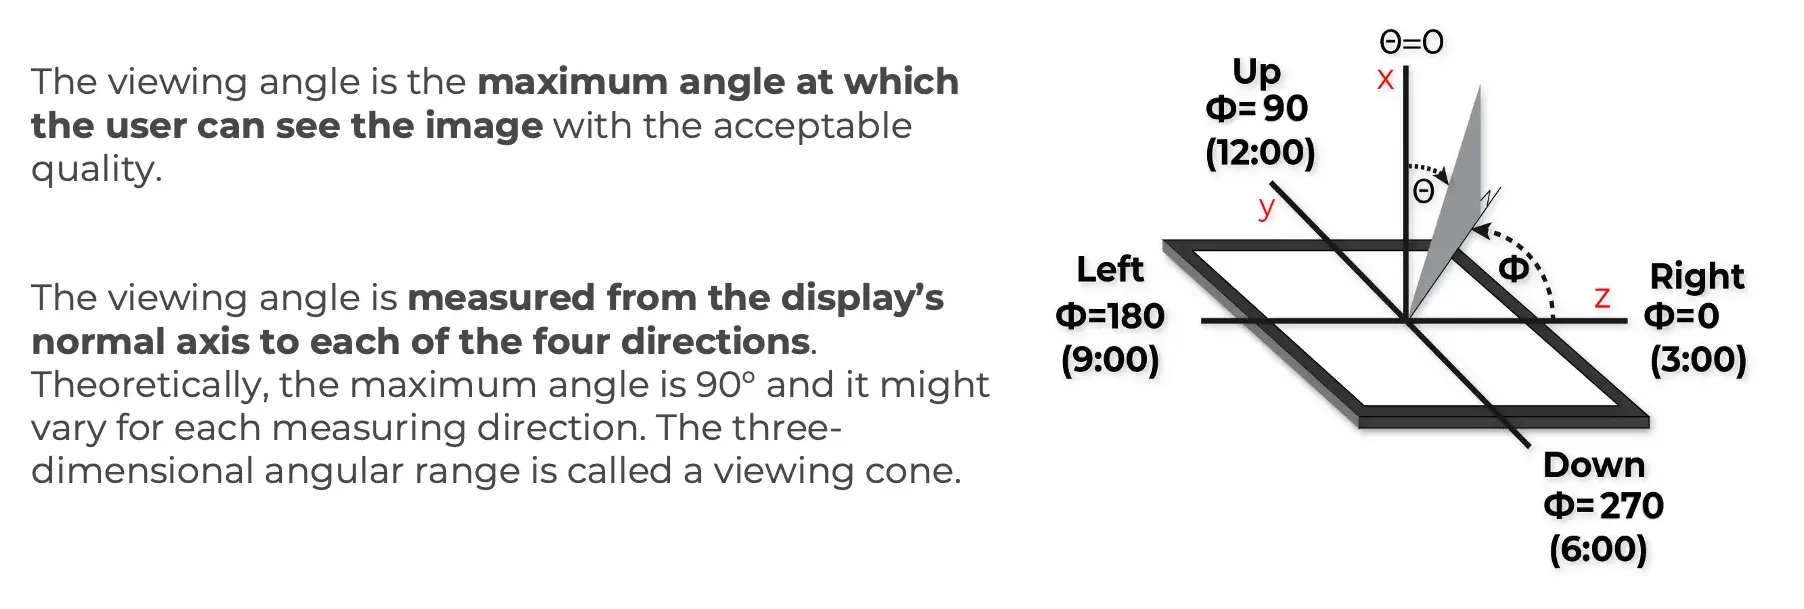 Viewing angles of LCD displays